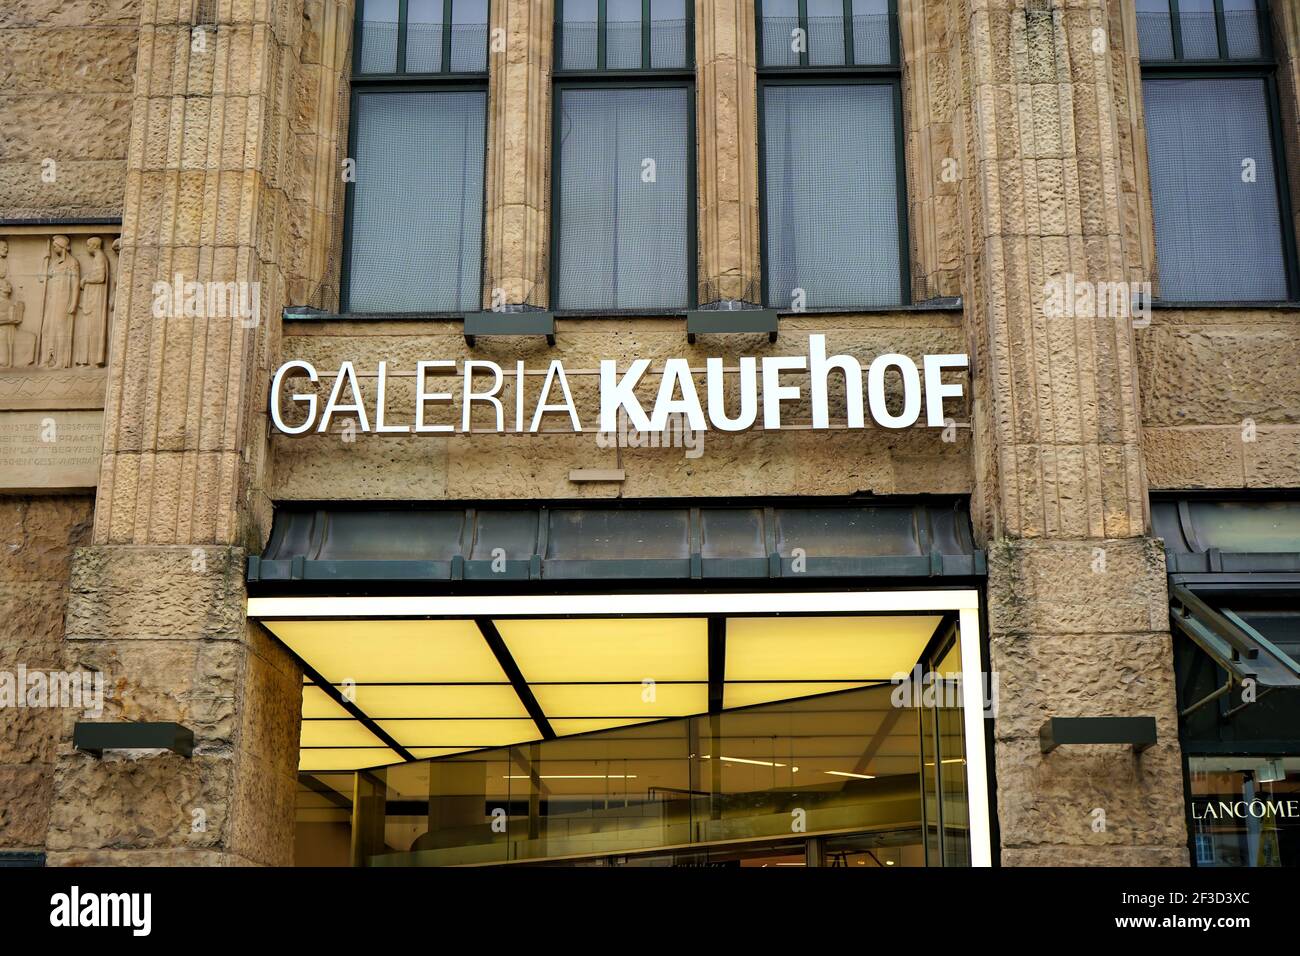 Close-up of the entrance of the epartment store 'Galeria Kaufhof' at Königsallee in Düsseldorf. Galeria Kaufhof is a German department store chain. Stock Photo